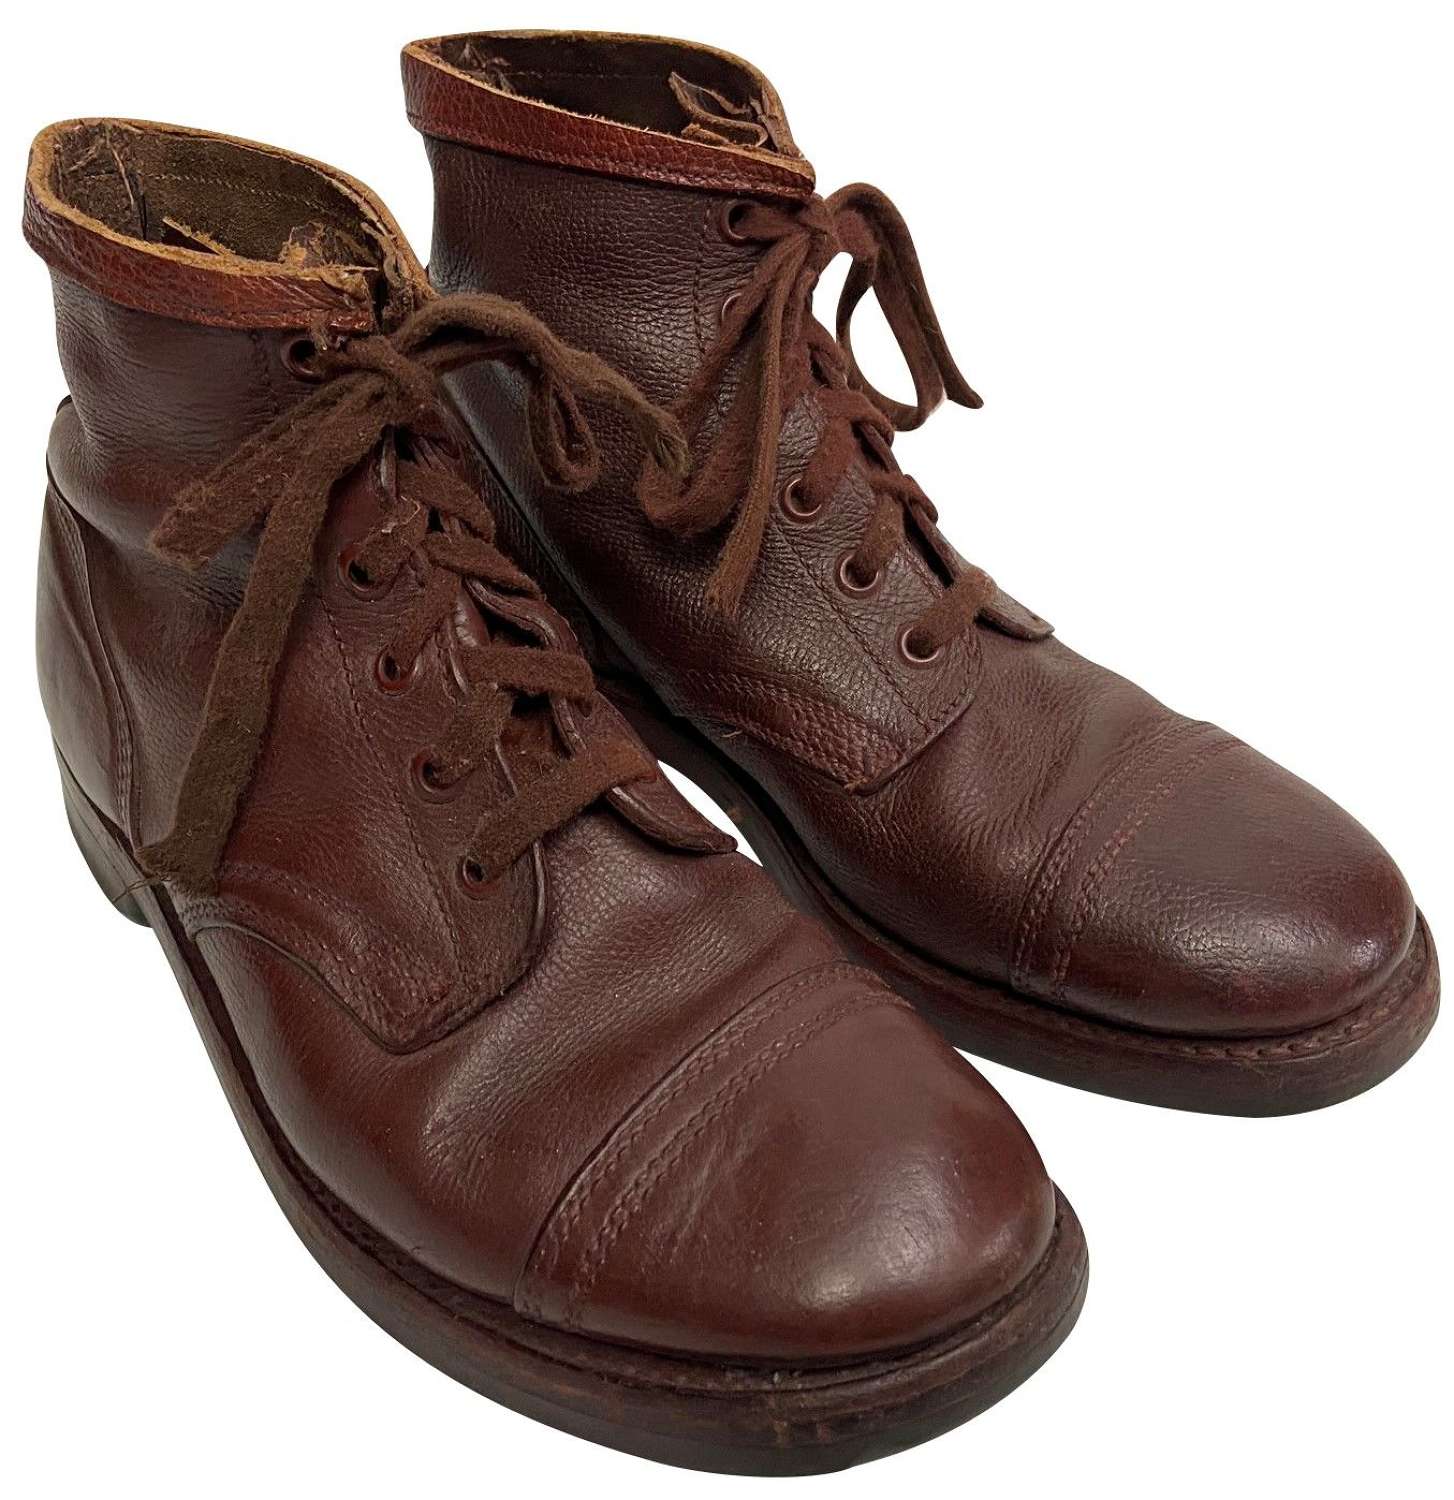 Original 1950s Dutch Military Brown Leather Ankle Boots - Size 10